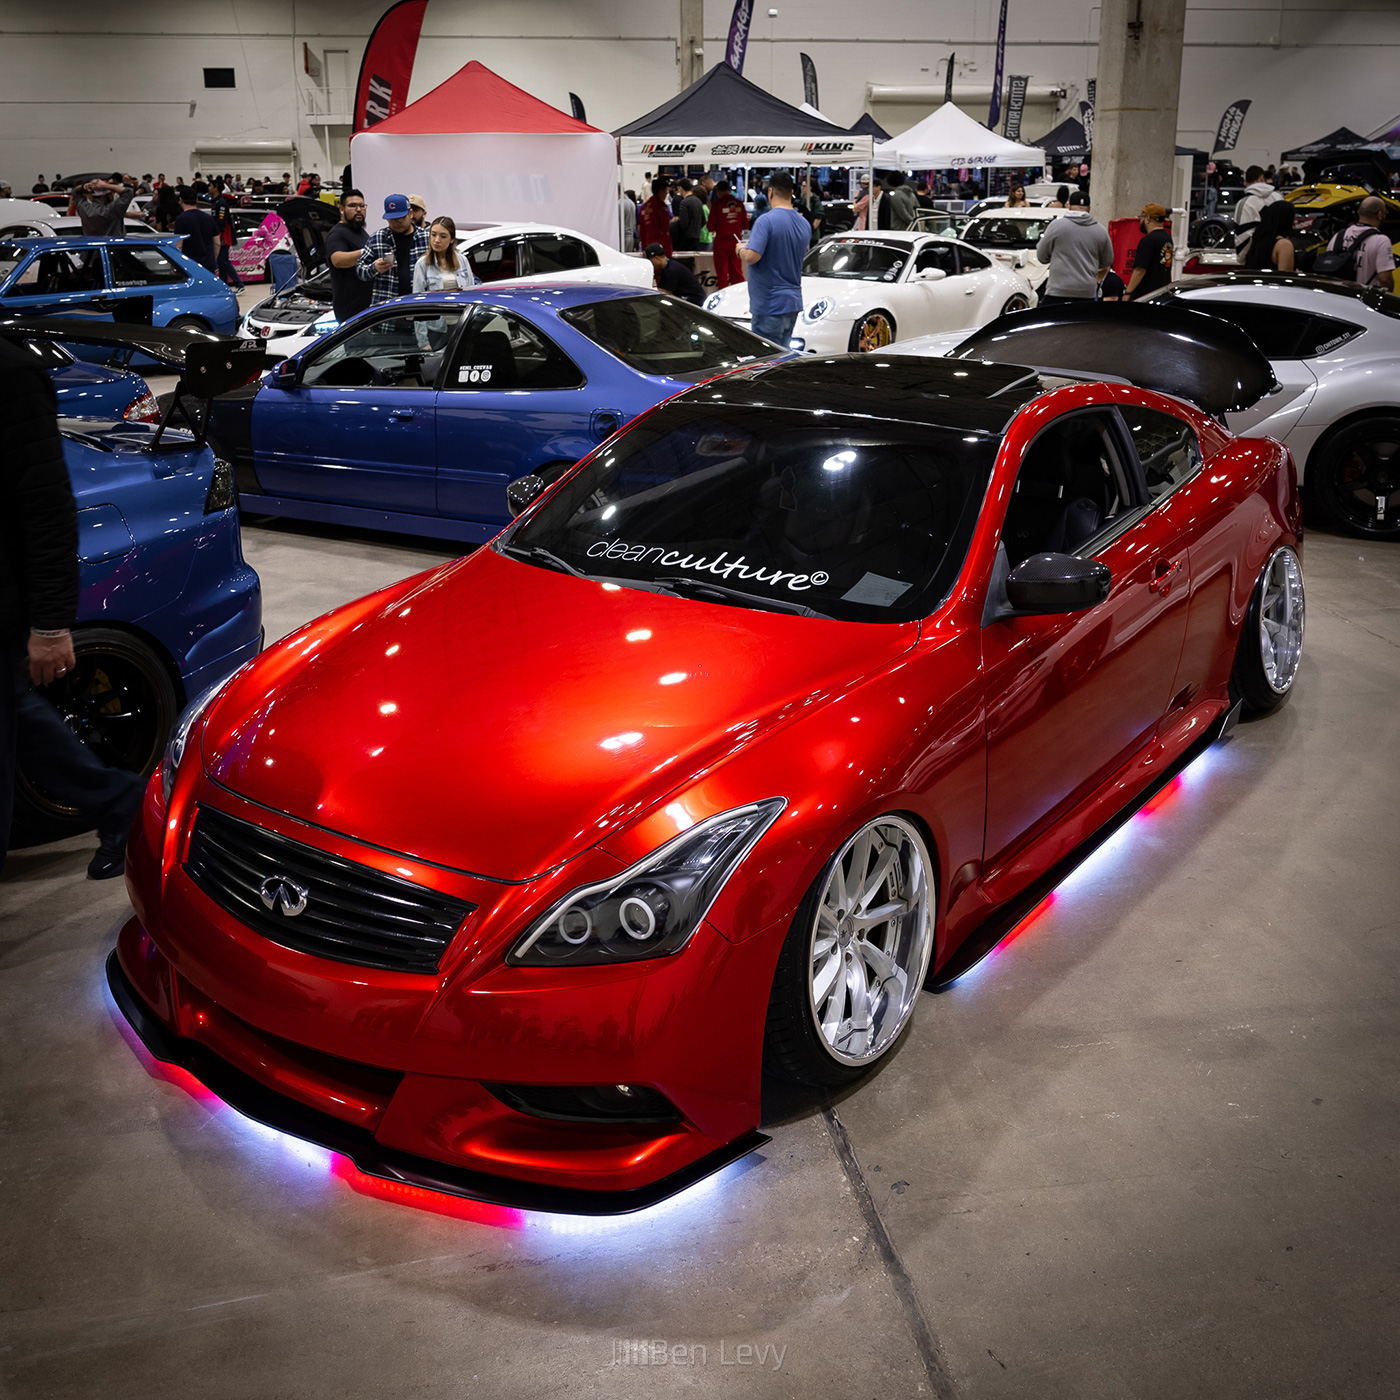 Bagged Red Infiniti G37 Coupe at Wekfest Chicago